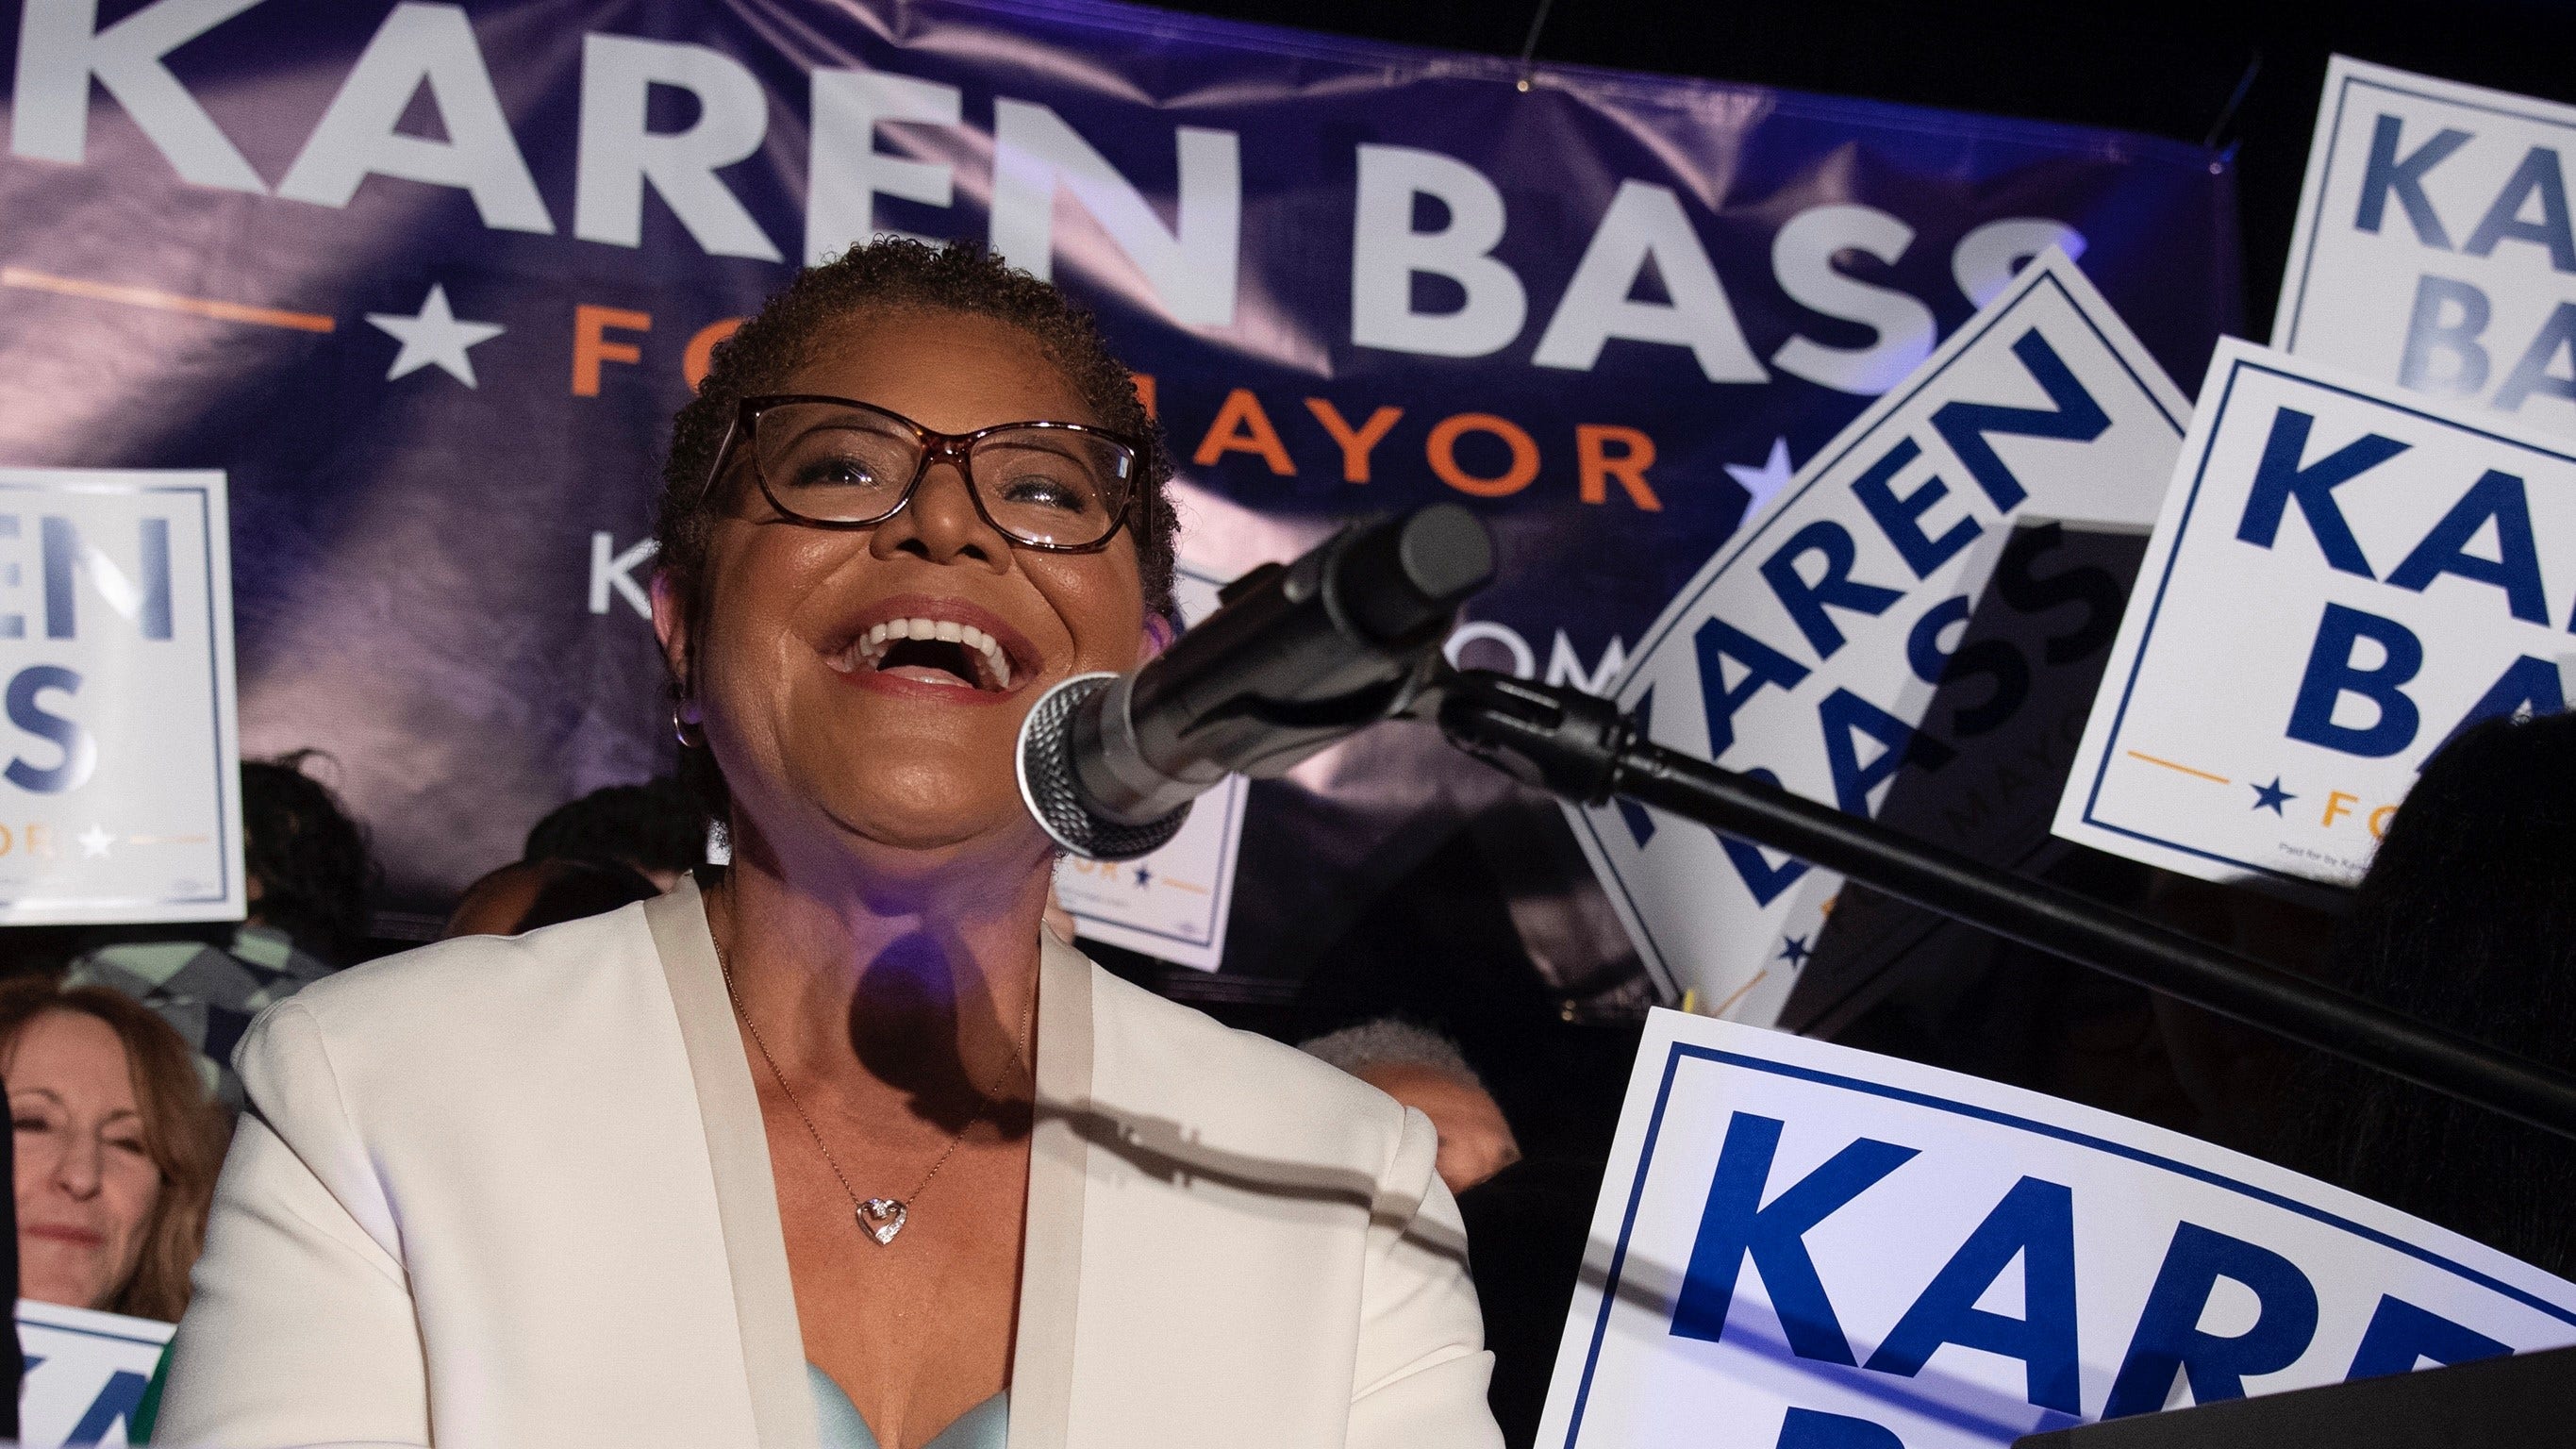 Los Angeles city councilman demands answers in Rep. Karen Bass home burglary from LAPD chief, city attorney